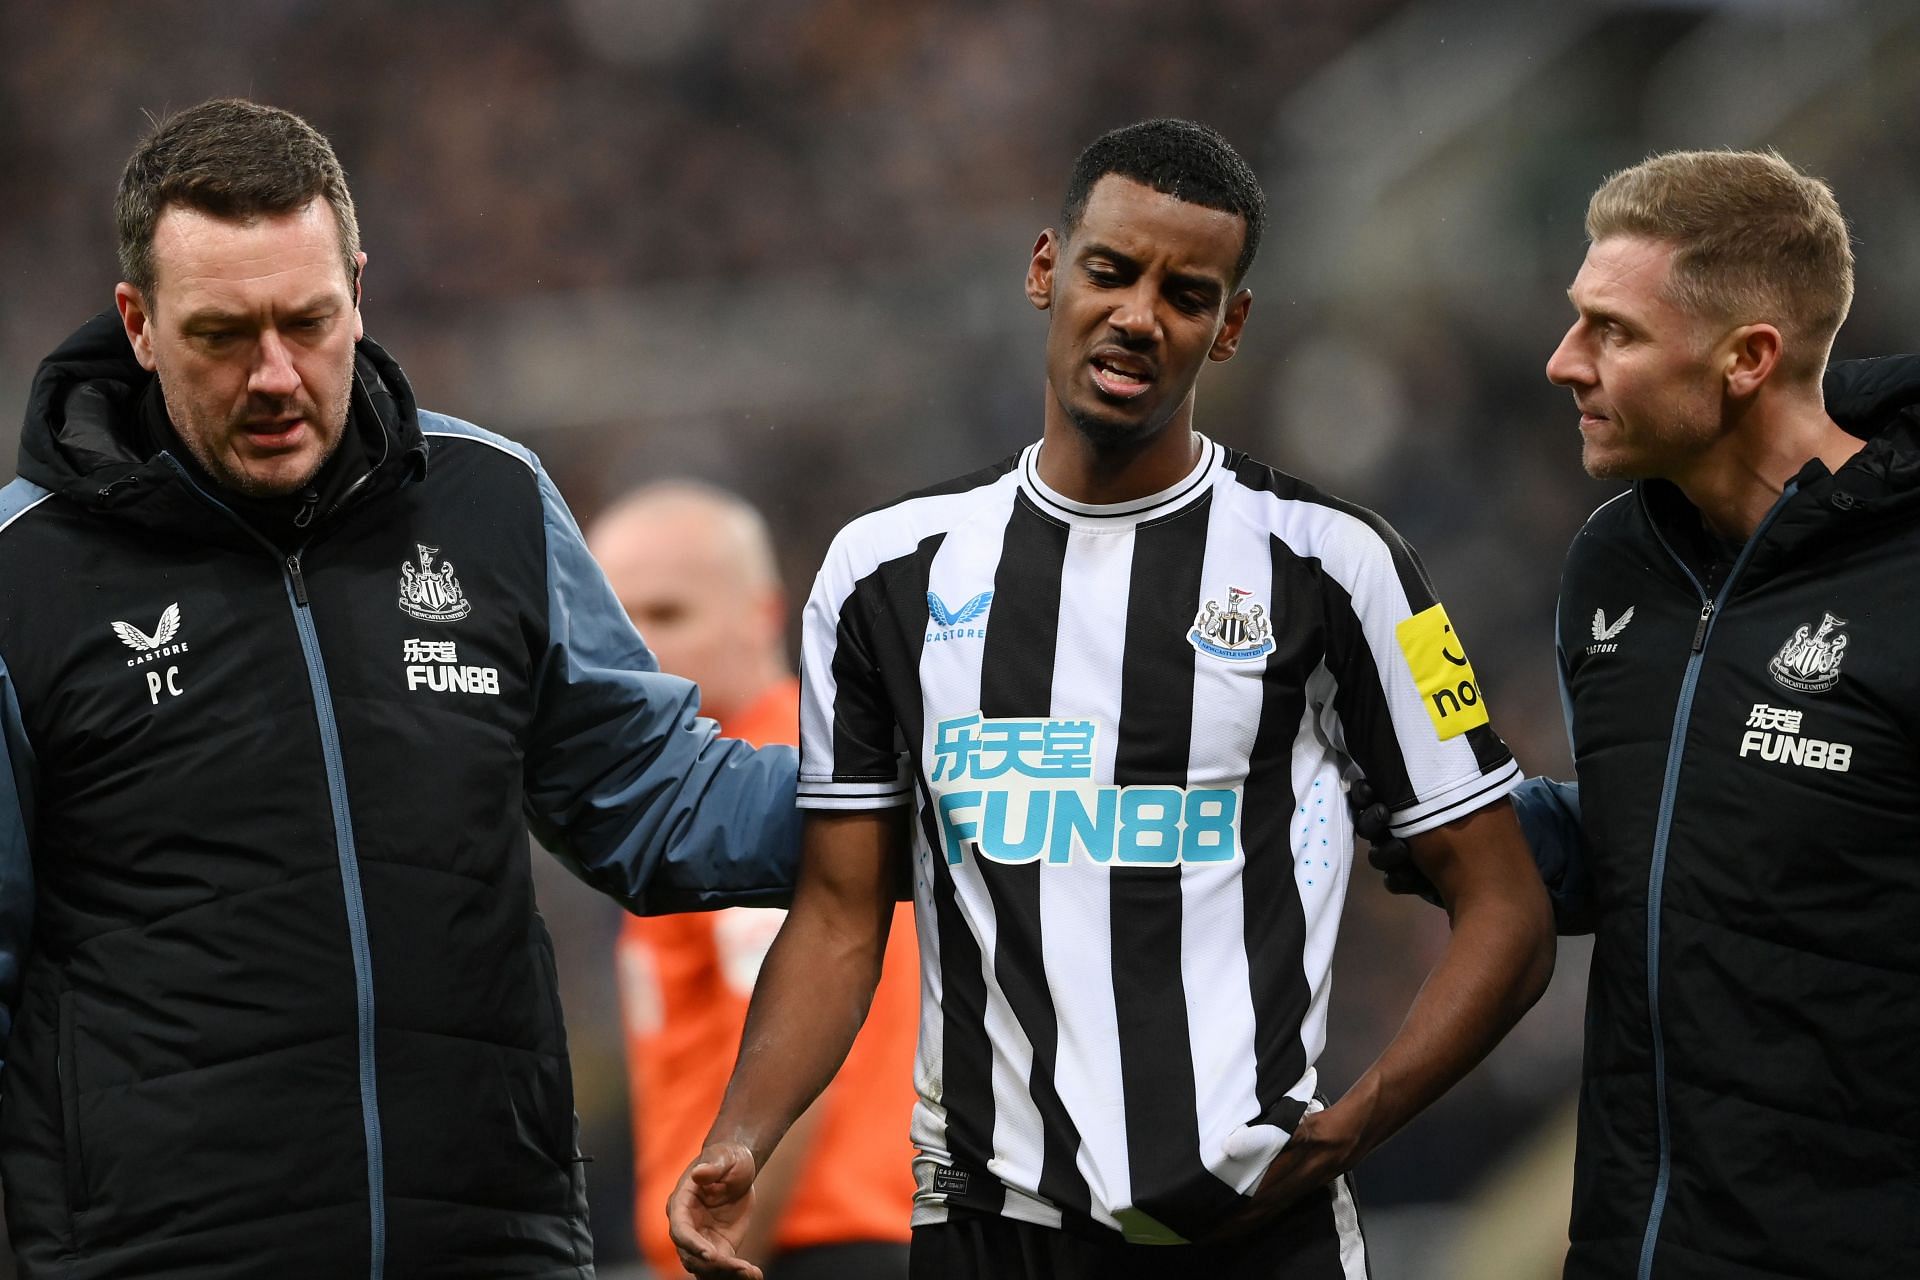 Newcastle United performed well despite their injuries